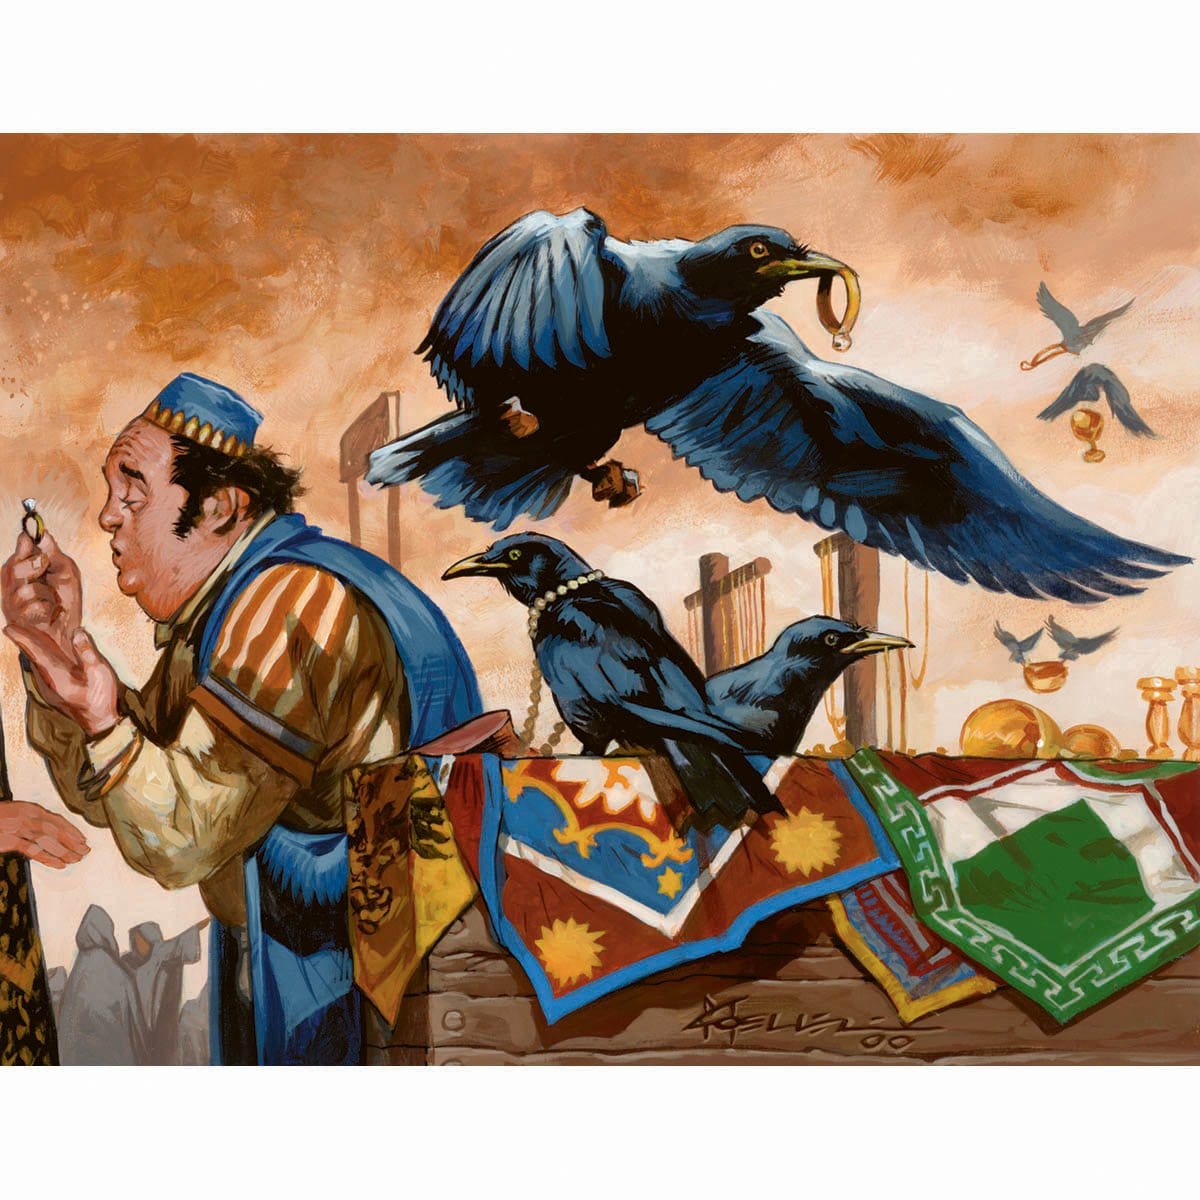 Thieving Magpie Print - Print - Original Magic Art - Accessories for Magic the Gathering and other card games